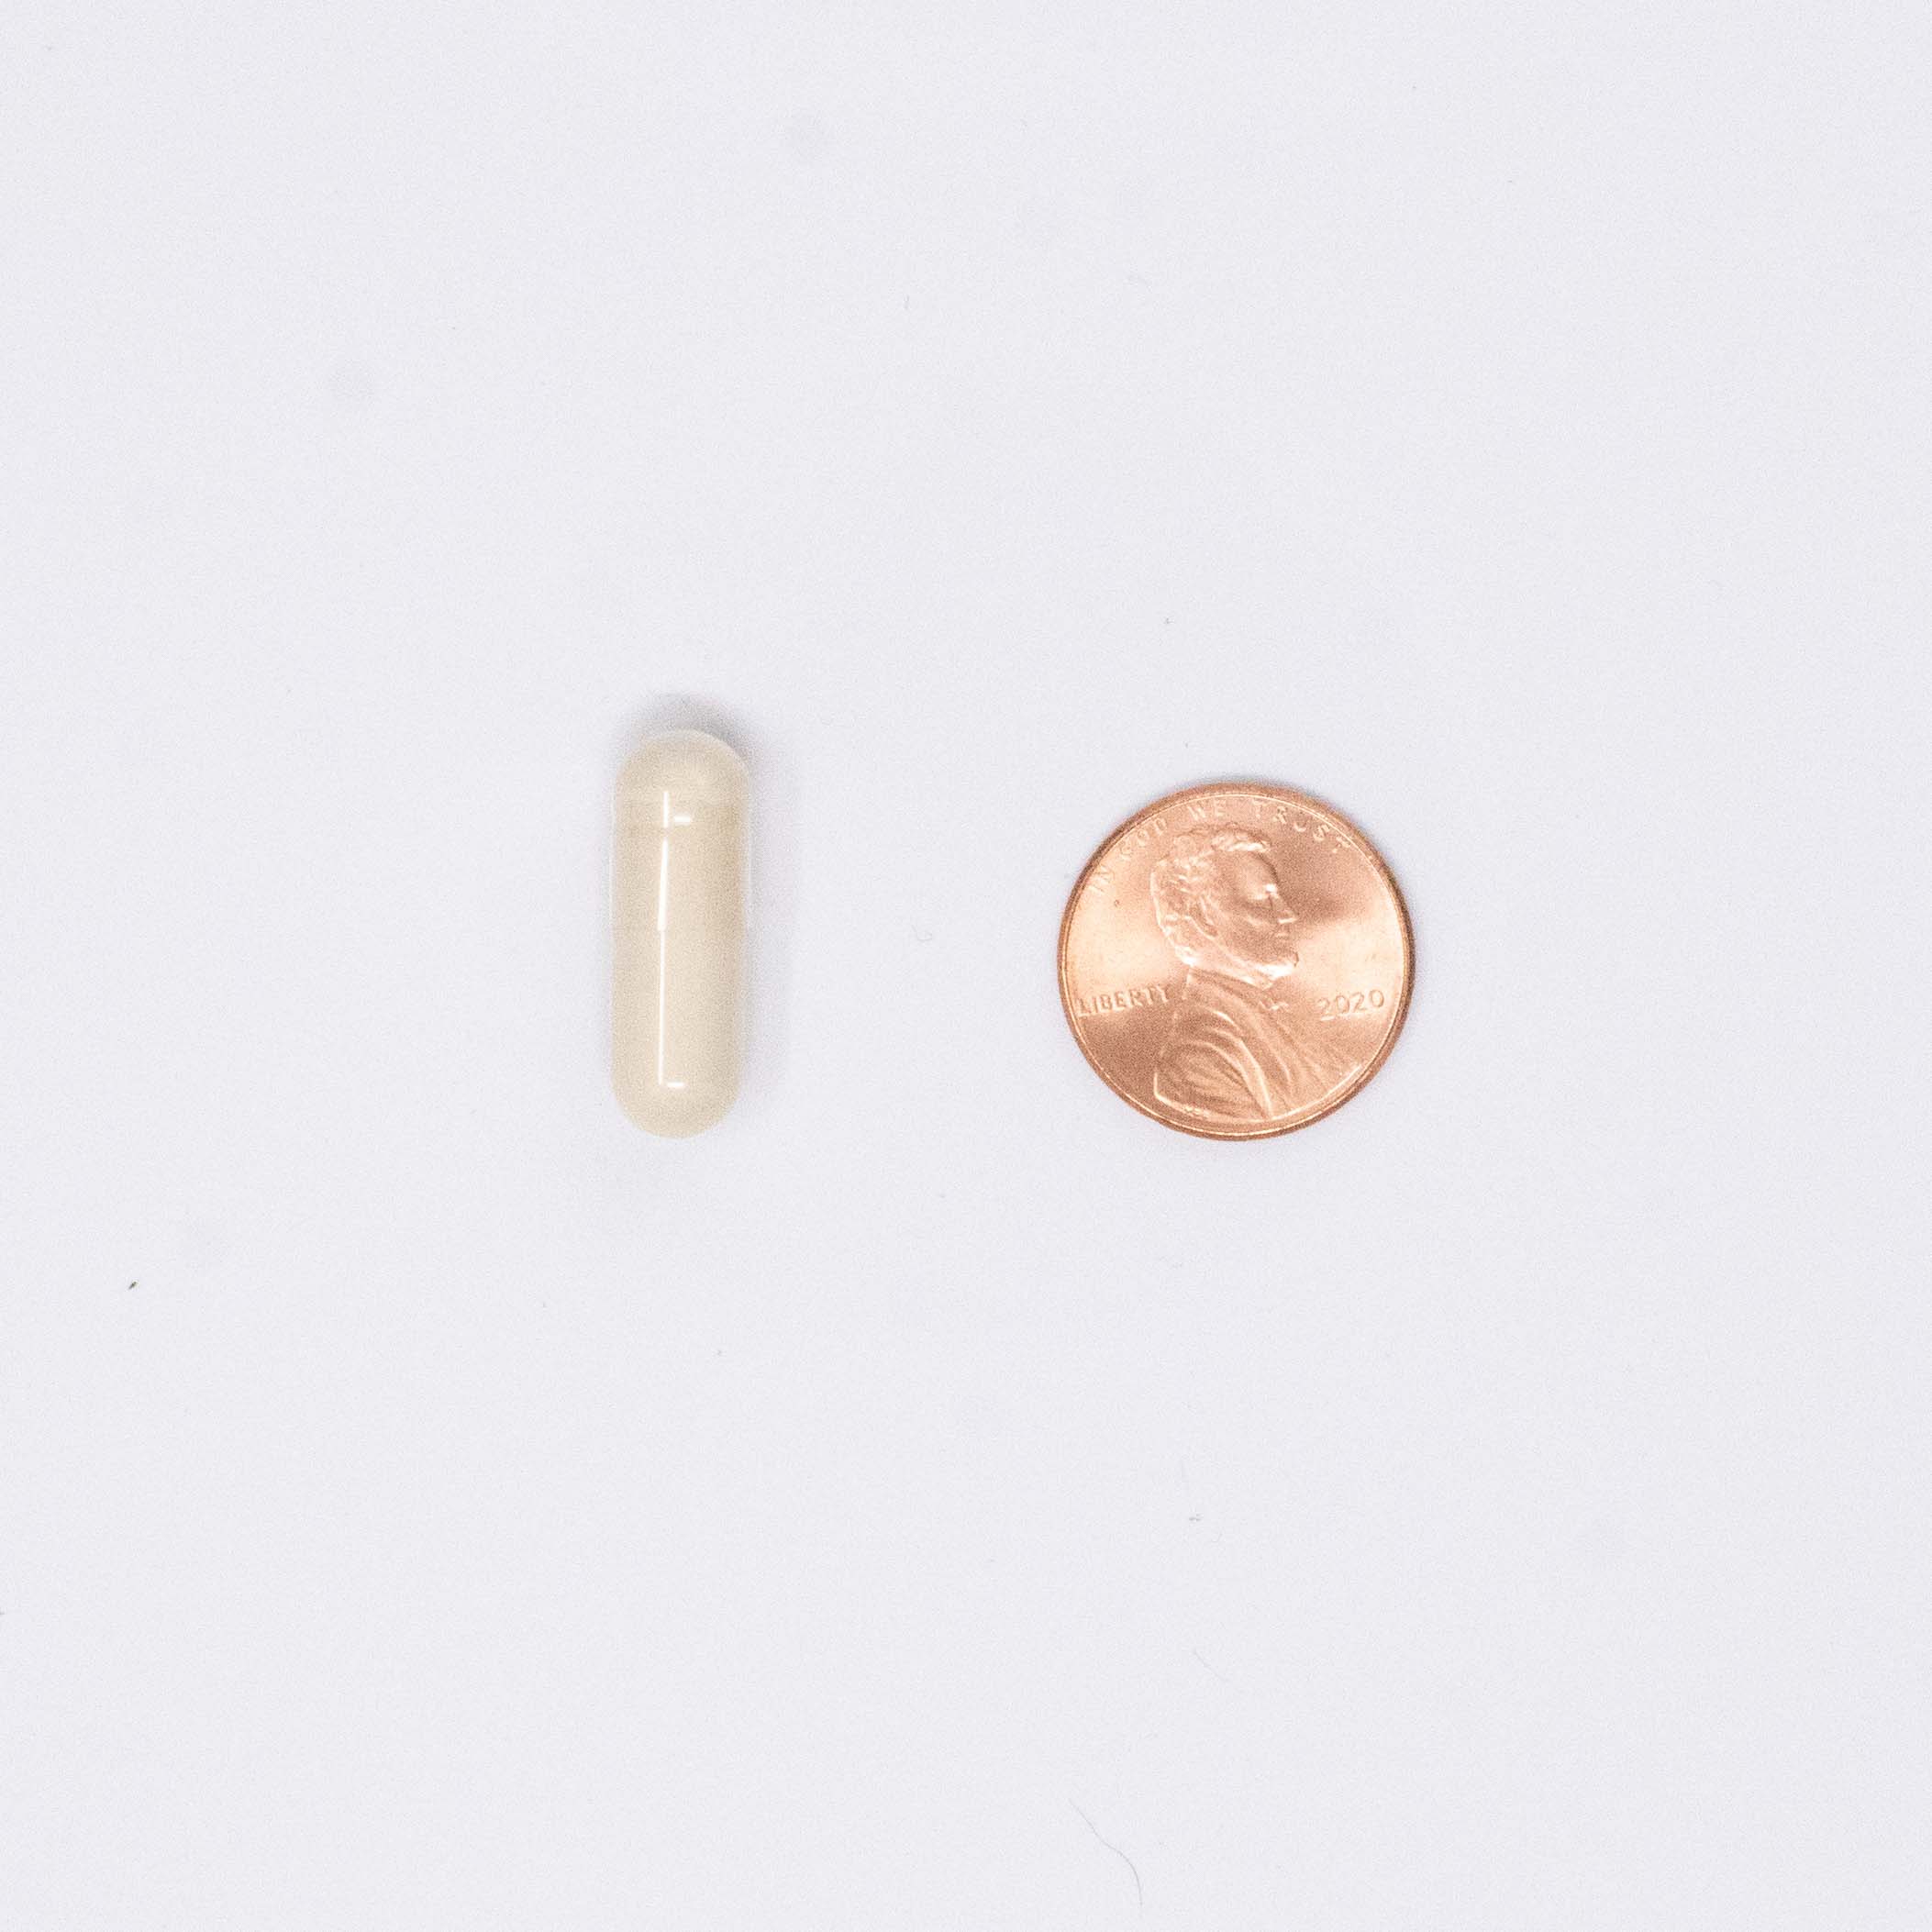 American Ginseng supplement size next to a penny